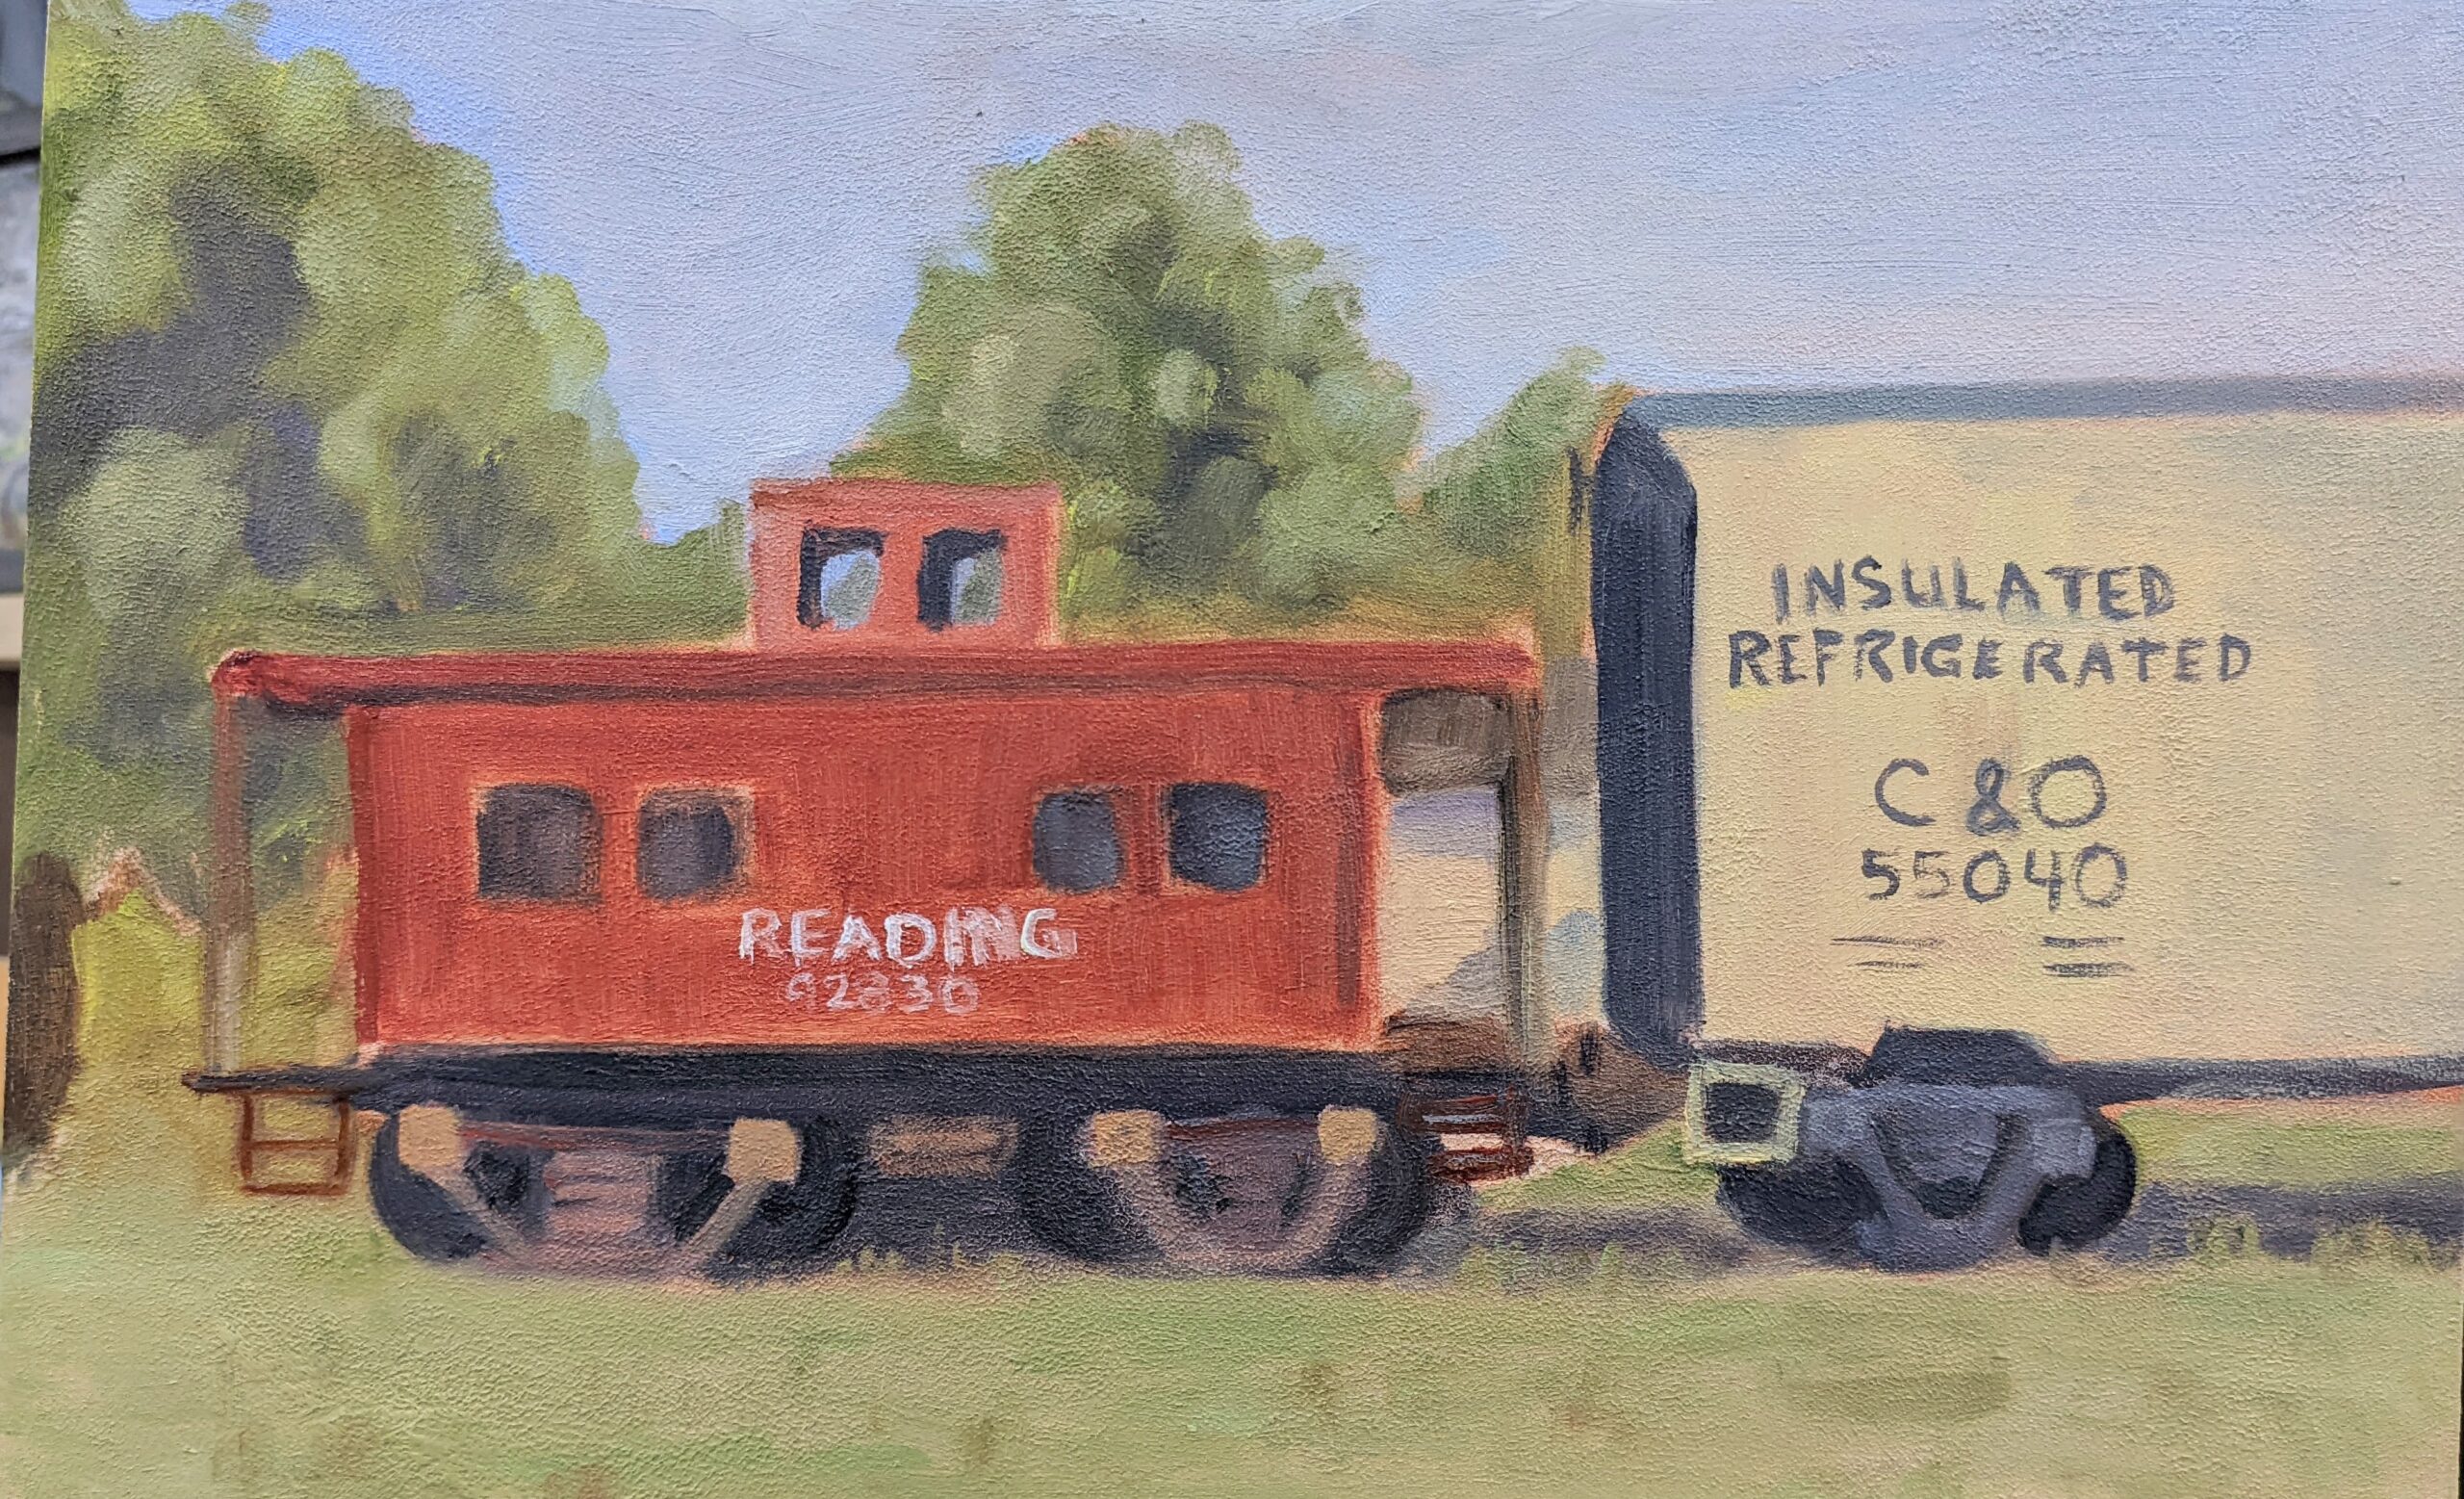 Kempton Caboose, parked in the Kempton station of the WK&S rail yard. Oil on Panel 12 x 8.